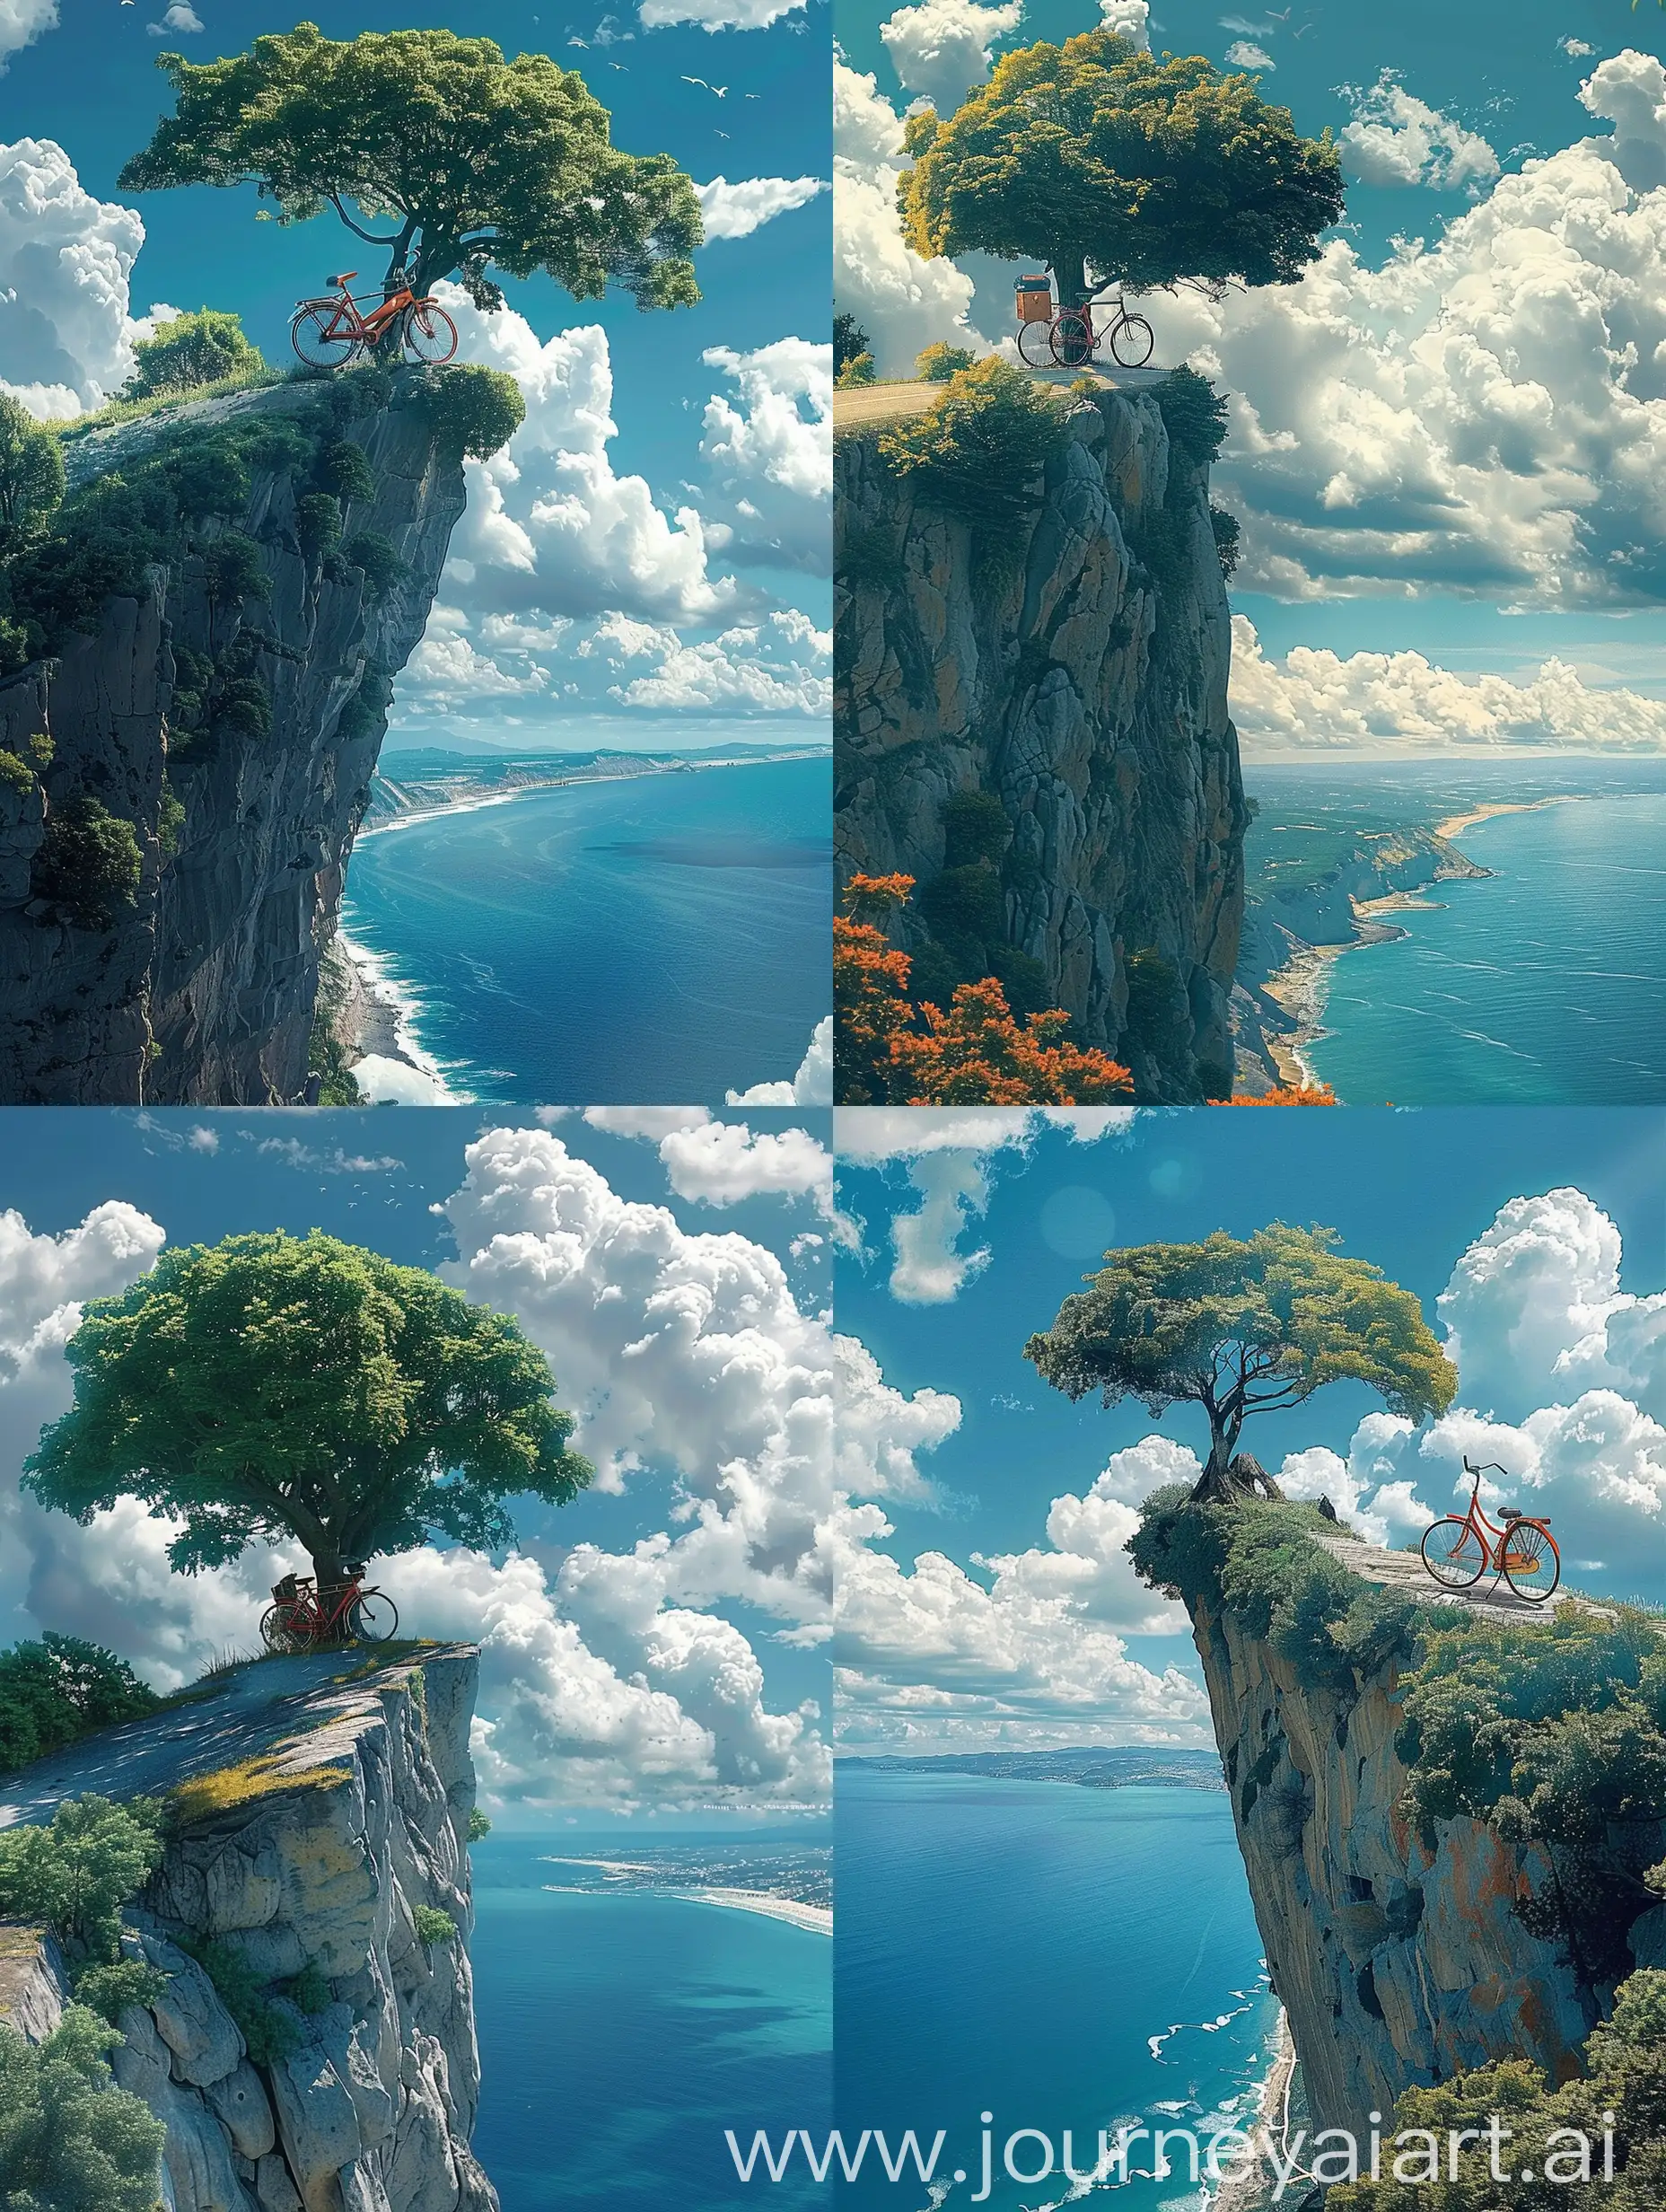 A high cliff,on top is a old bicycle under the huge tree on top of the cliff,far below is a Ocean,fluffy white clouds